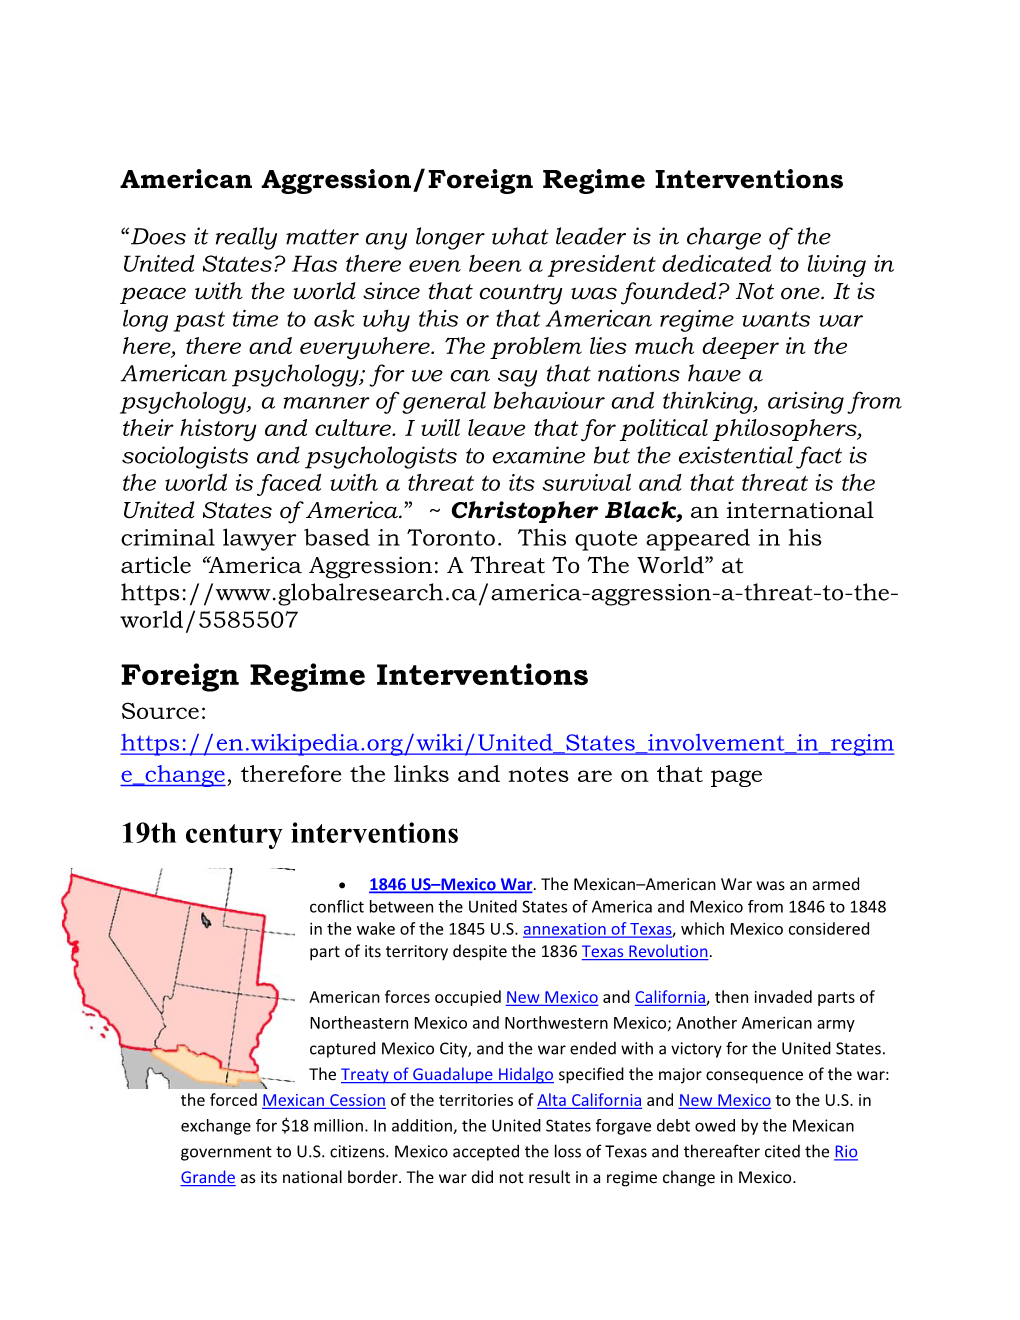 American Aggression – Foreign Regime Interventions